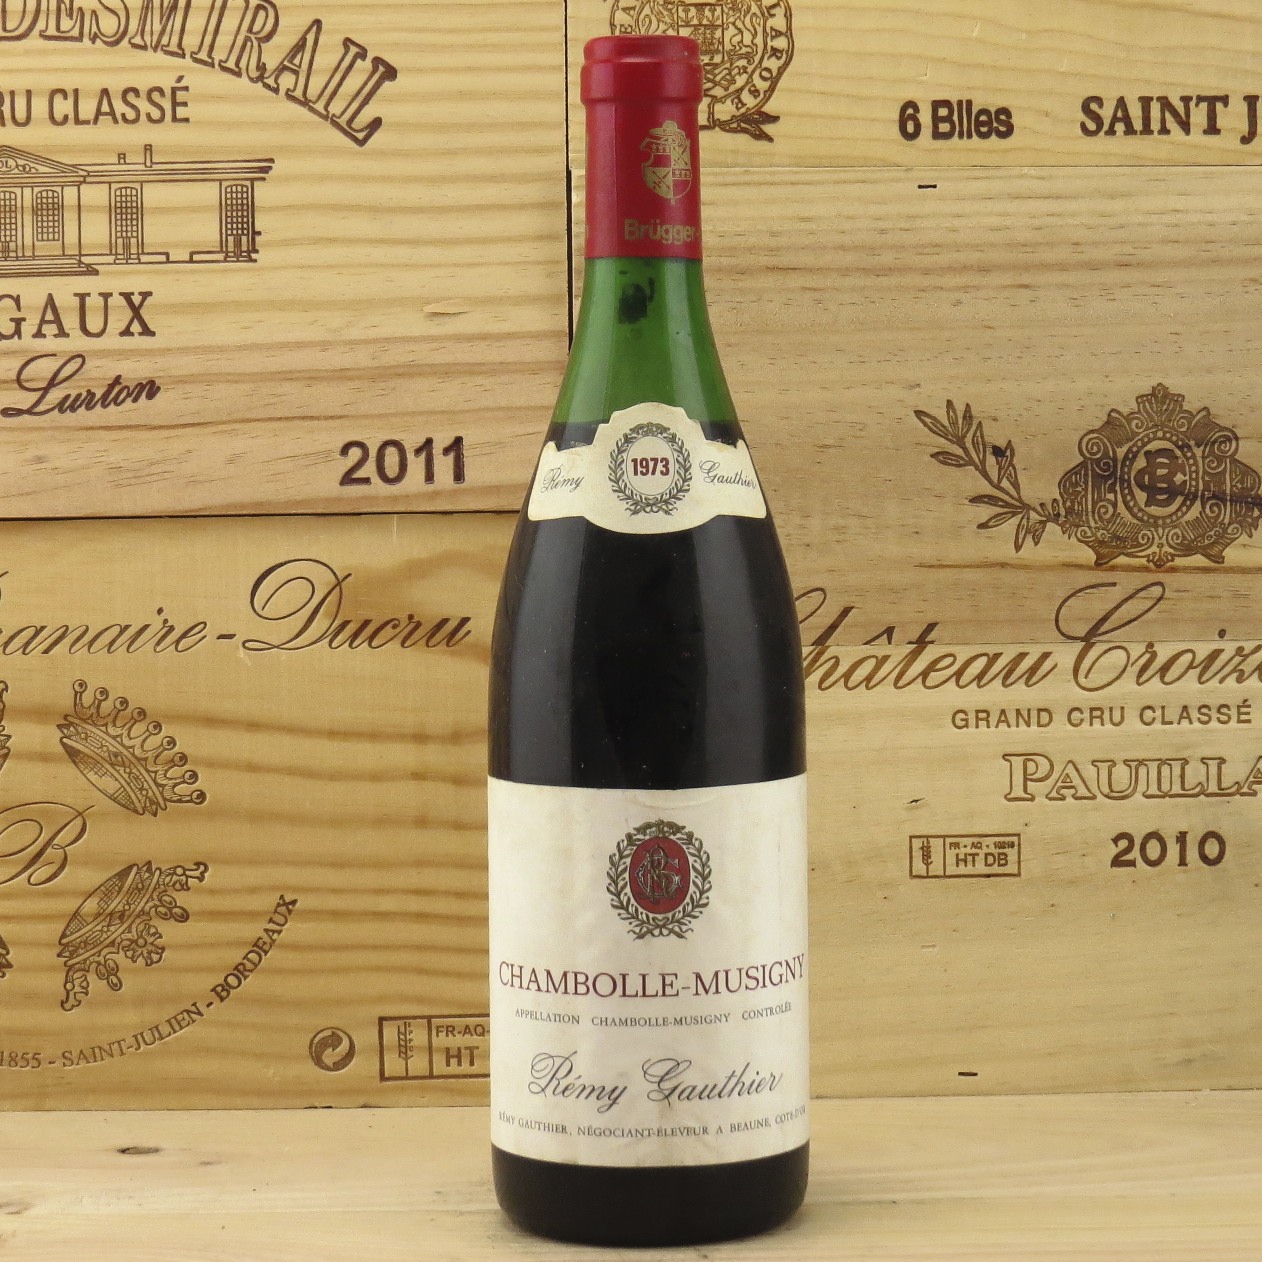 1973 Chambolle Musigny Remy Gauthier